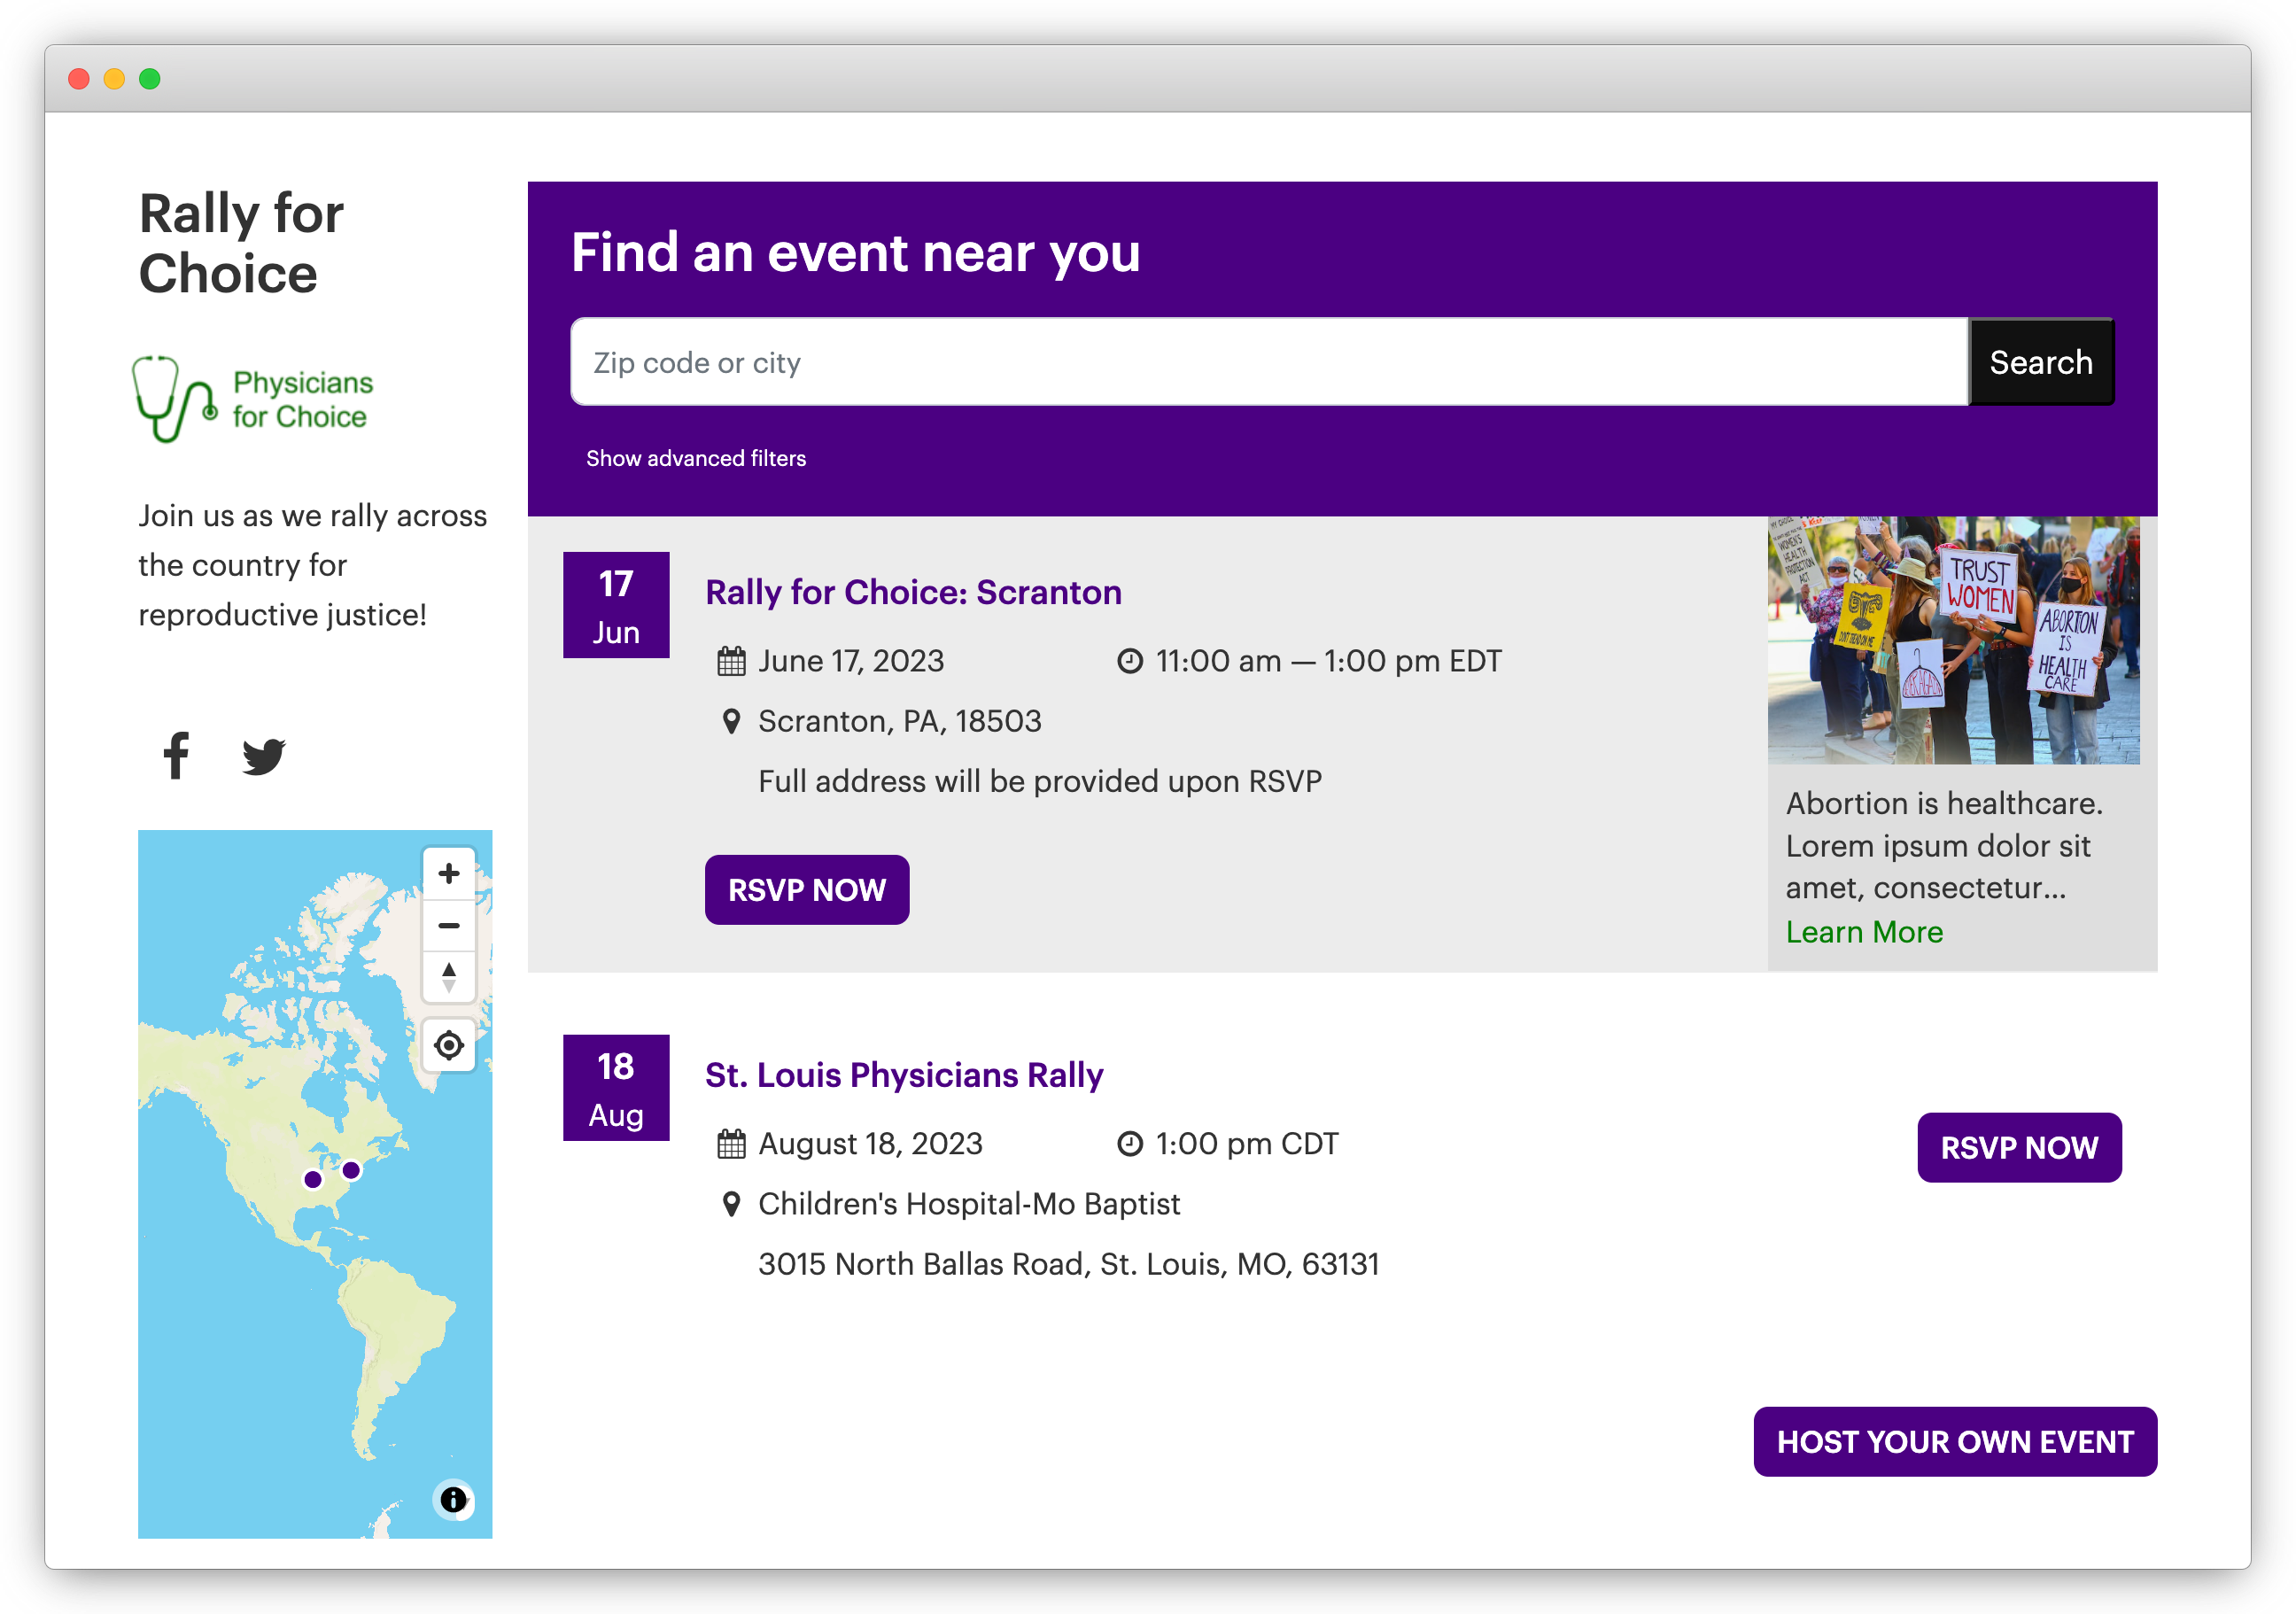 ControlShift's calendars feature makes it easy to manage hundreds of member-hosted events.